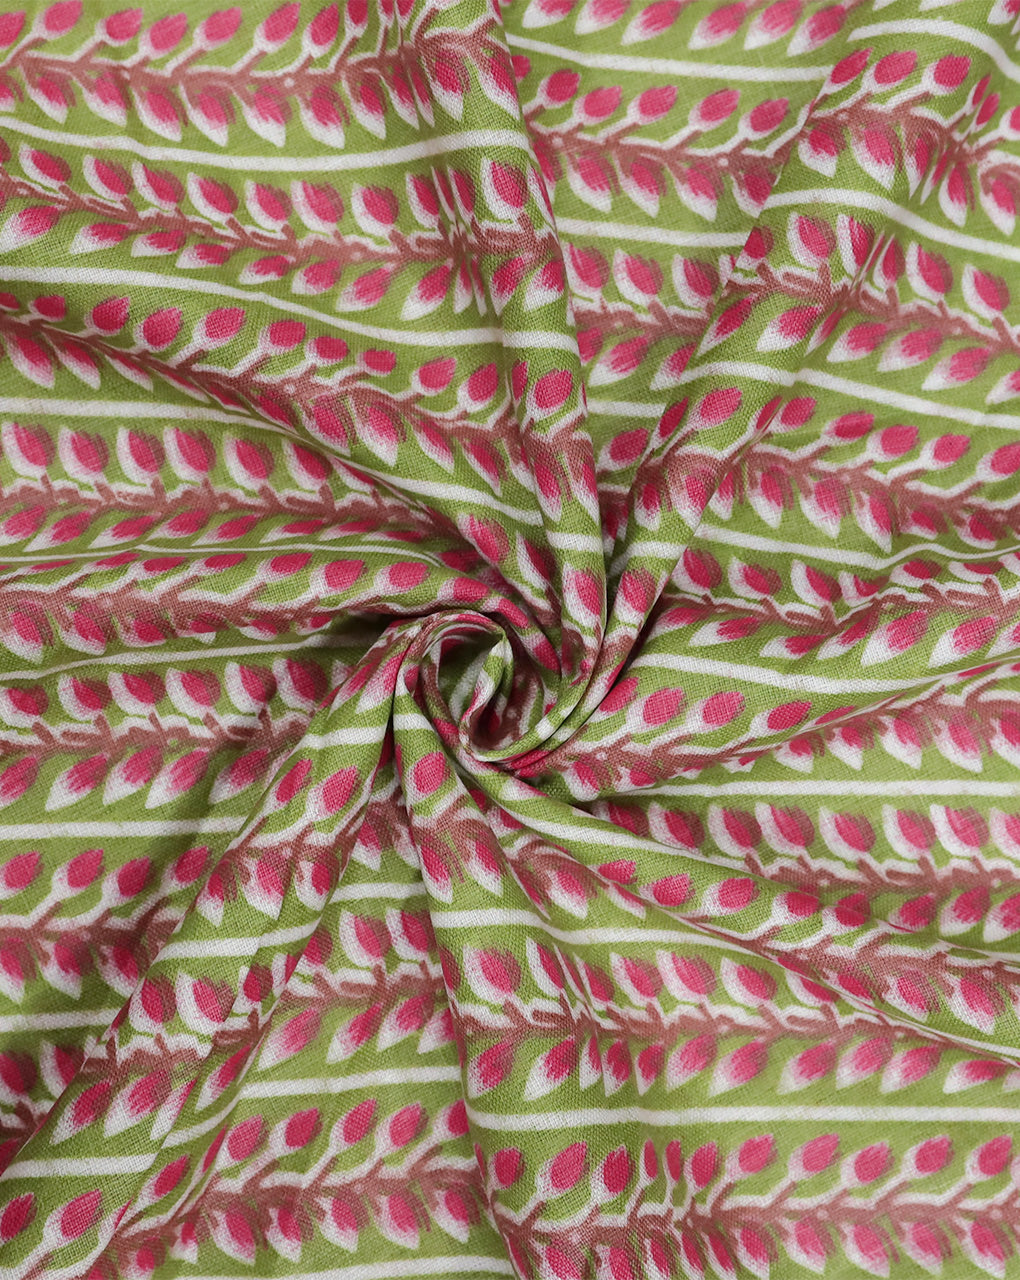 MULTICOLOR LEAFS DESIGN PRINTED POLYESTER SPUN FABRIC